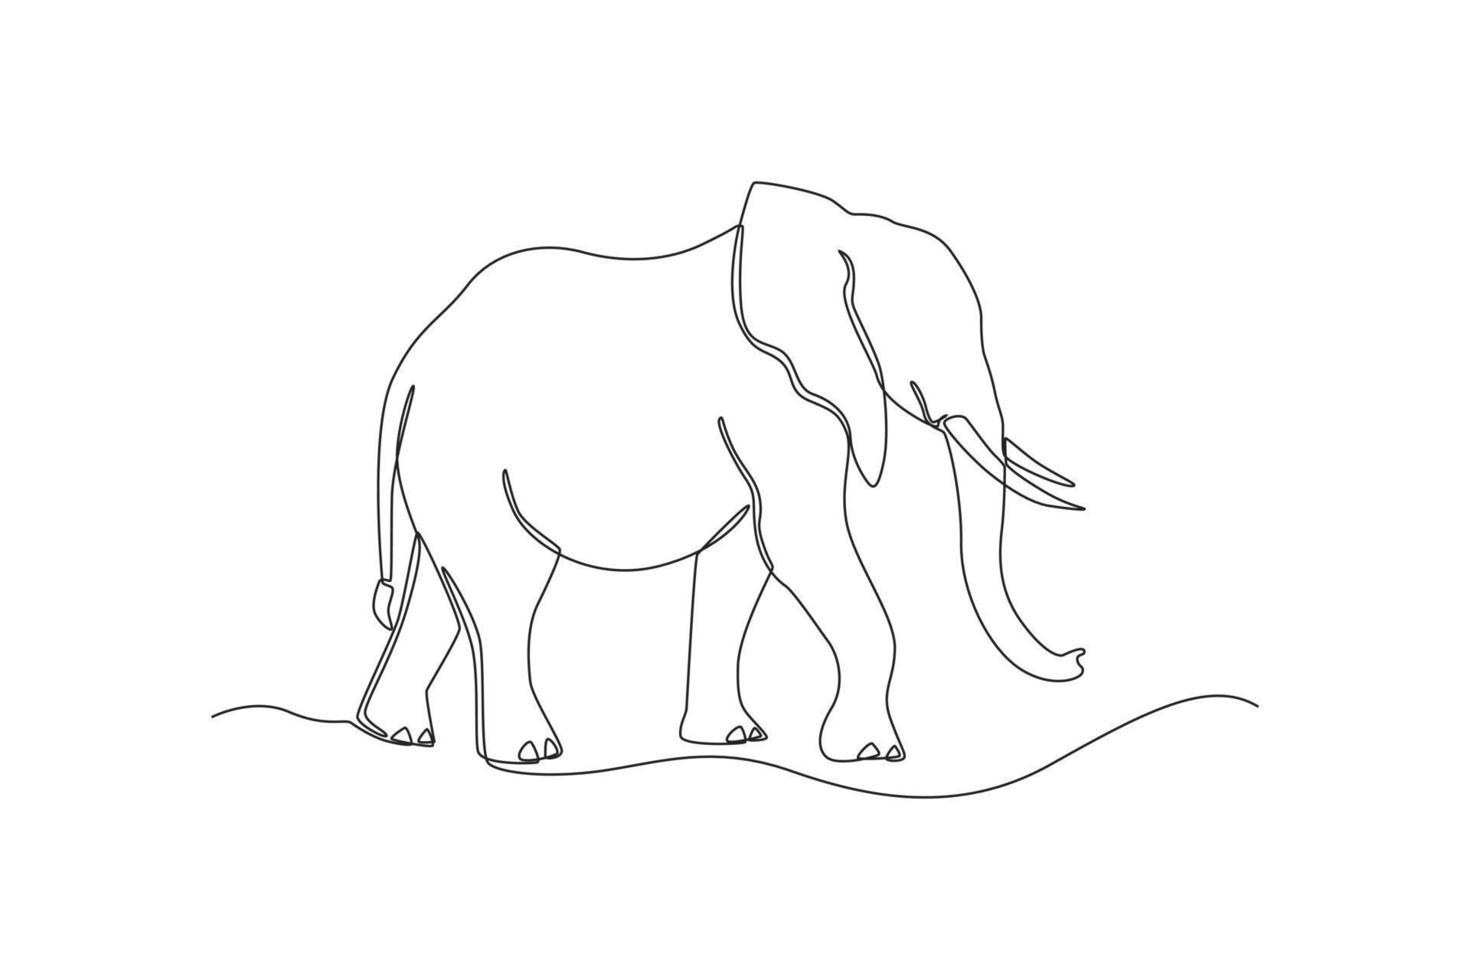 One continuous line drawing of a elephant. Animal concept. Single line draw design vector graphic illustration.